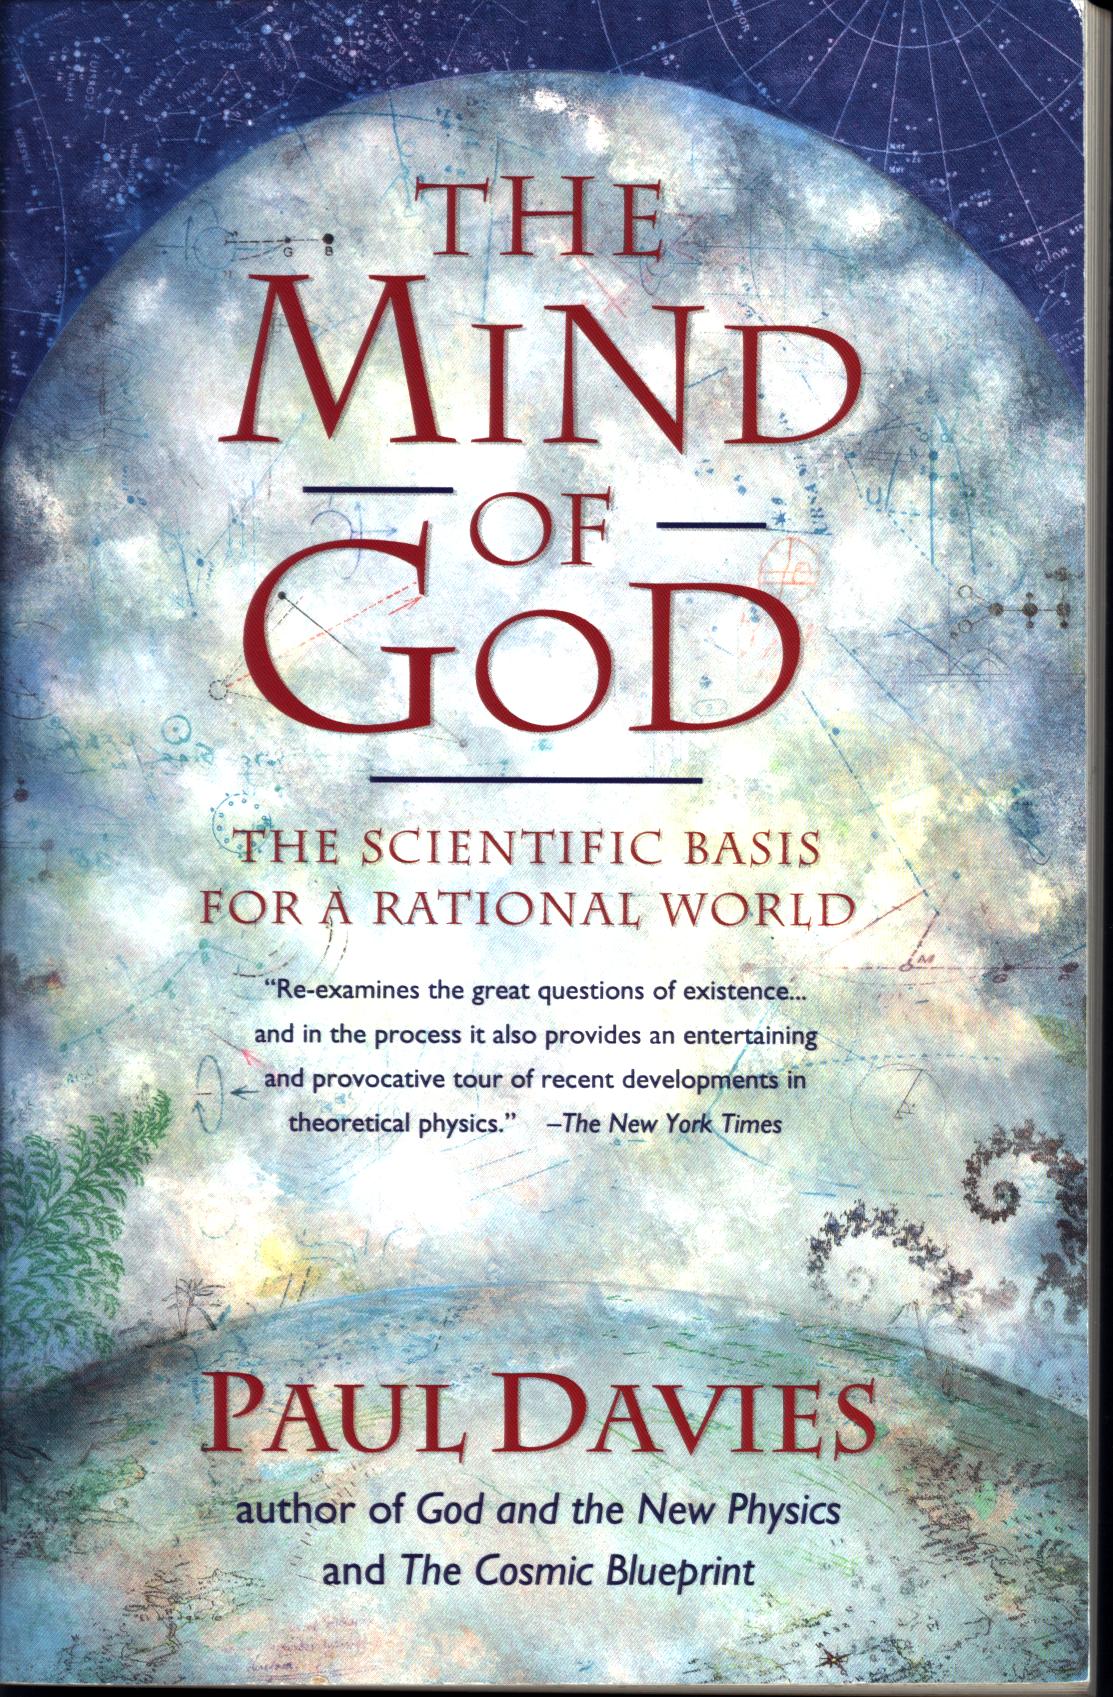 THE MIND OF GOD: the scientific basis for a rational world.